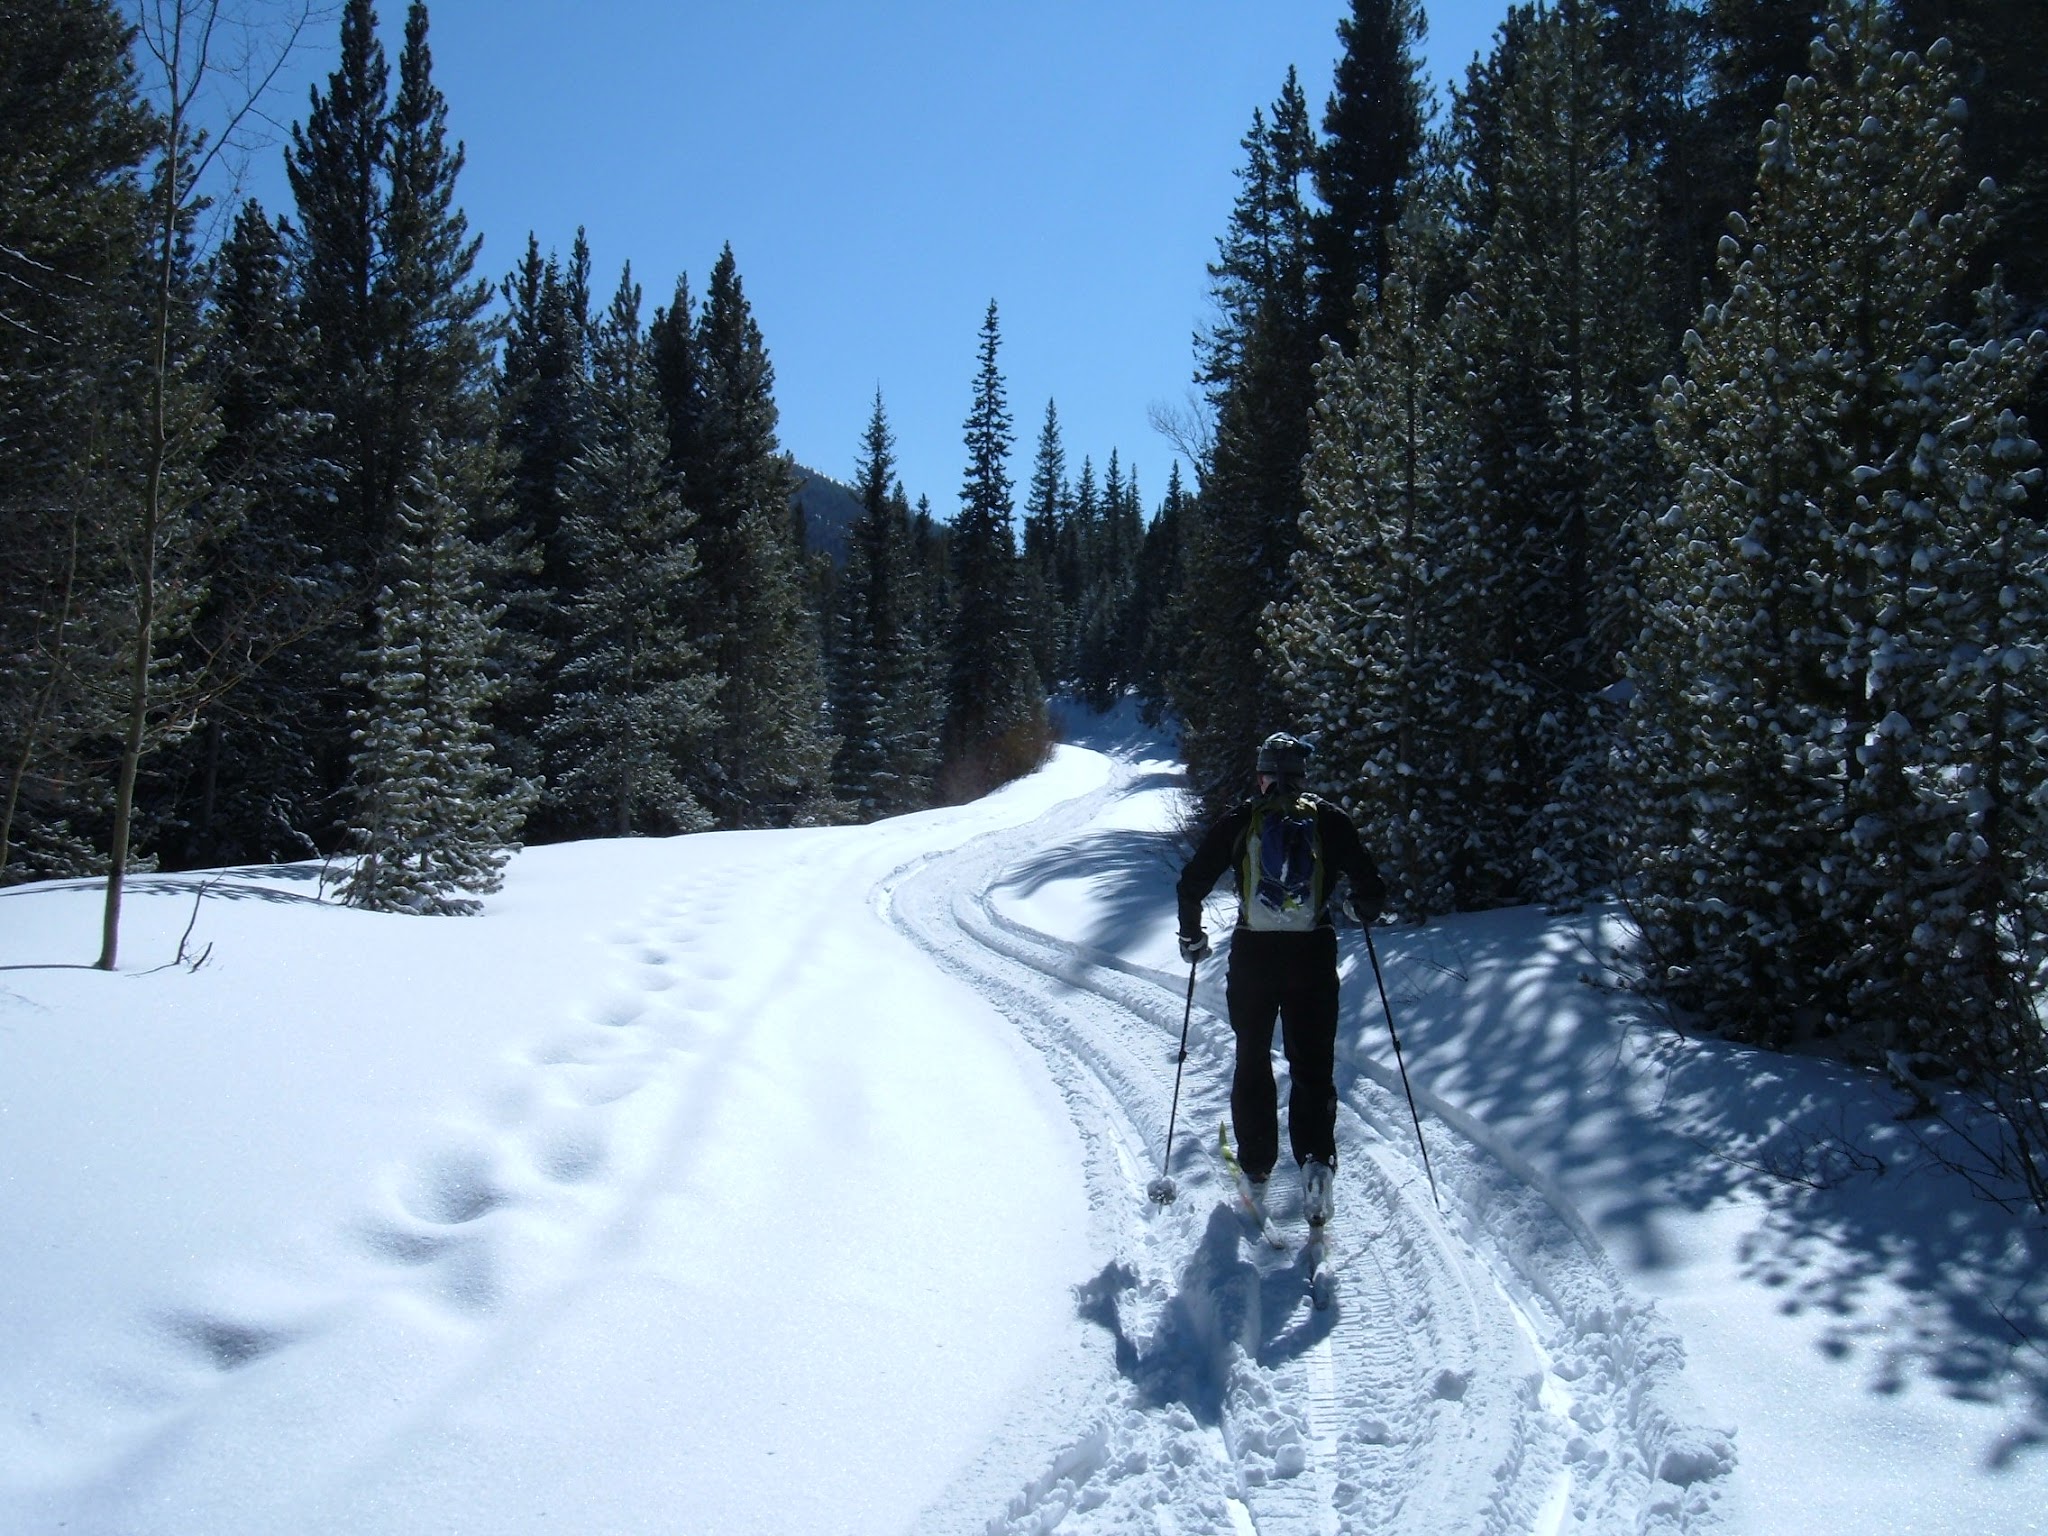 Cross country skier along a road with trees all around.